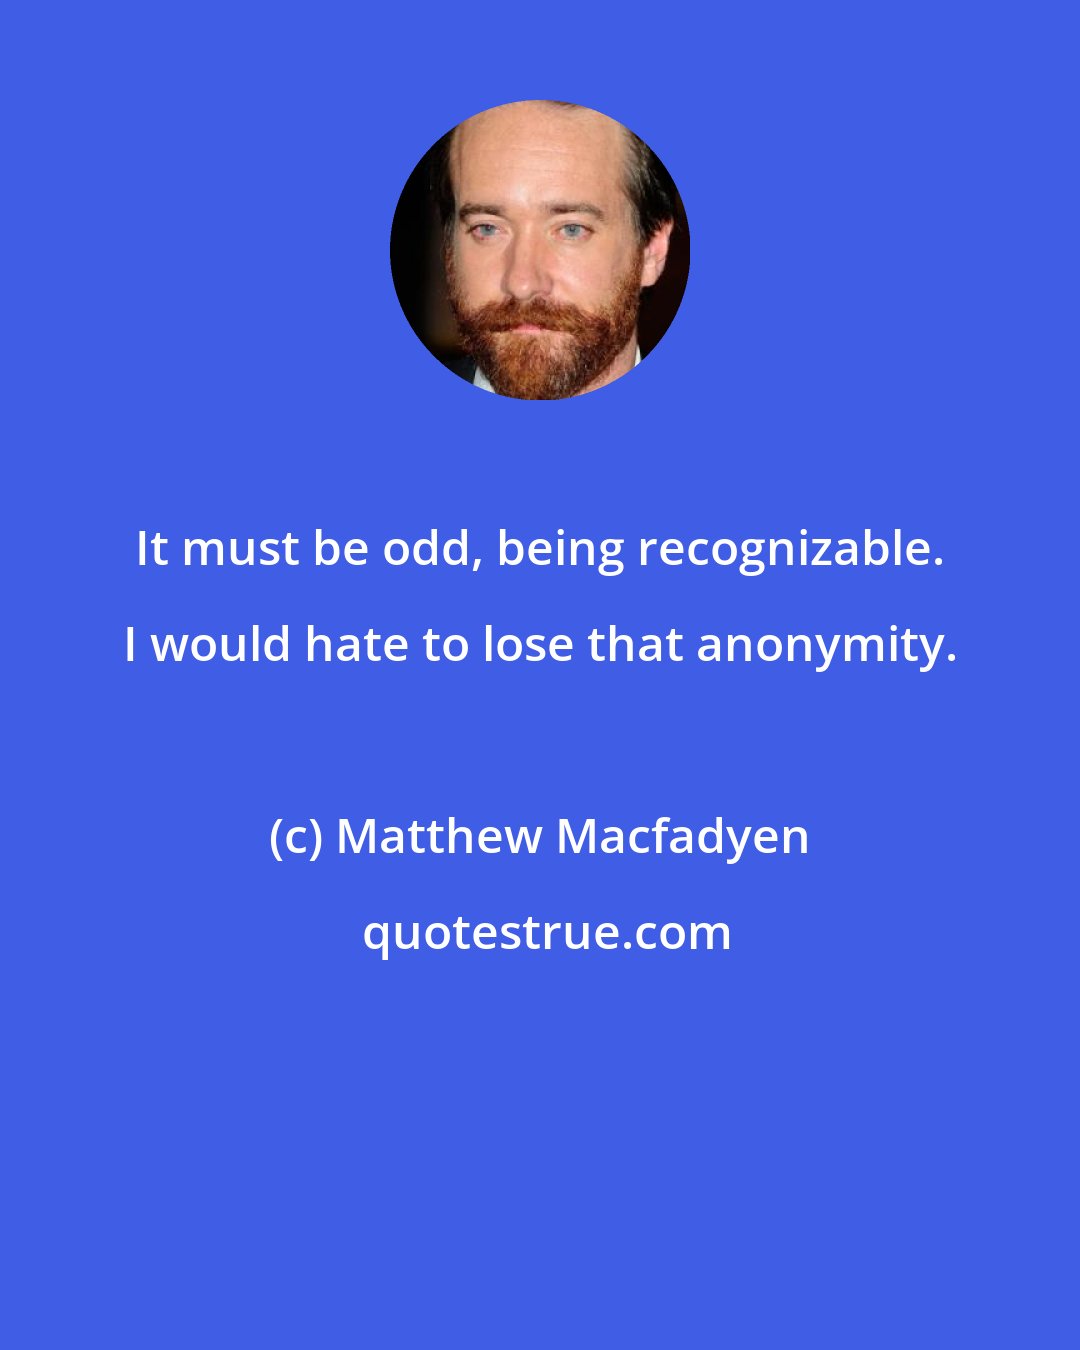 Matthew Macfadyen: It must be odd, being recognizable. I would hate to lose that anonymity.